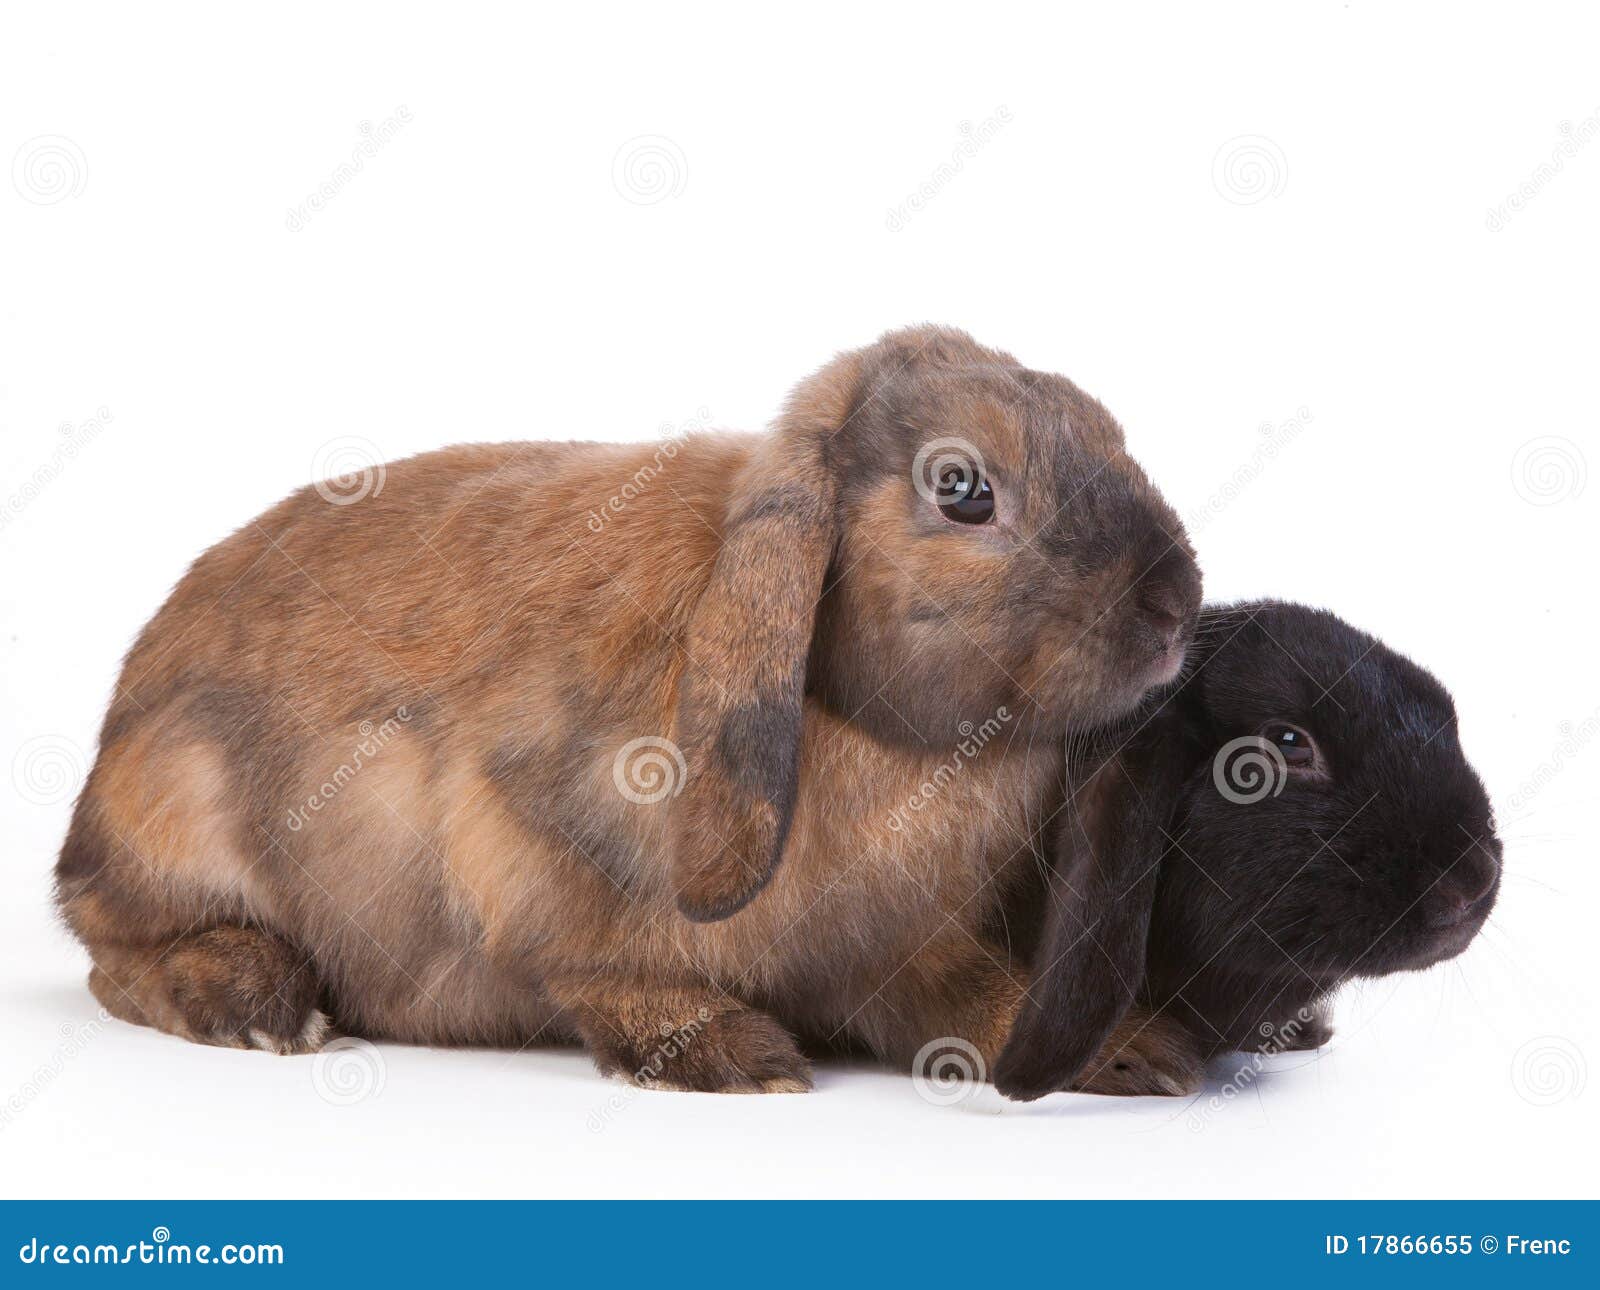 aphilile mkosana recommends black and brown bunnies pic